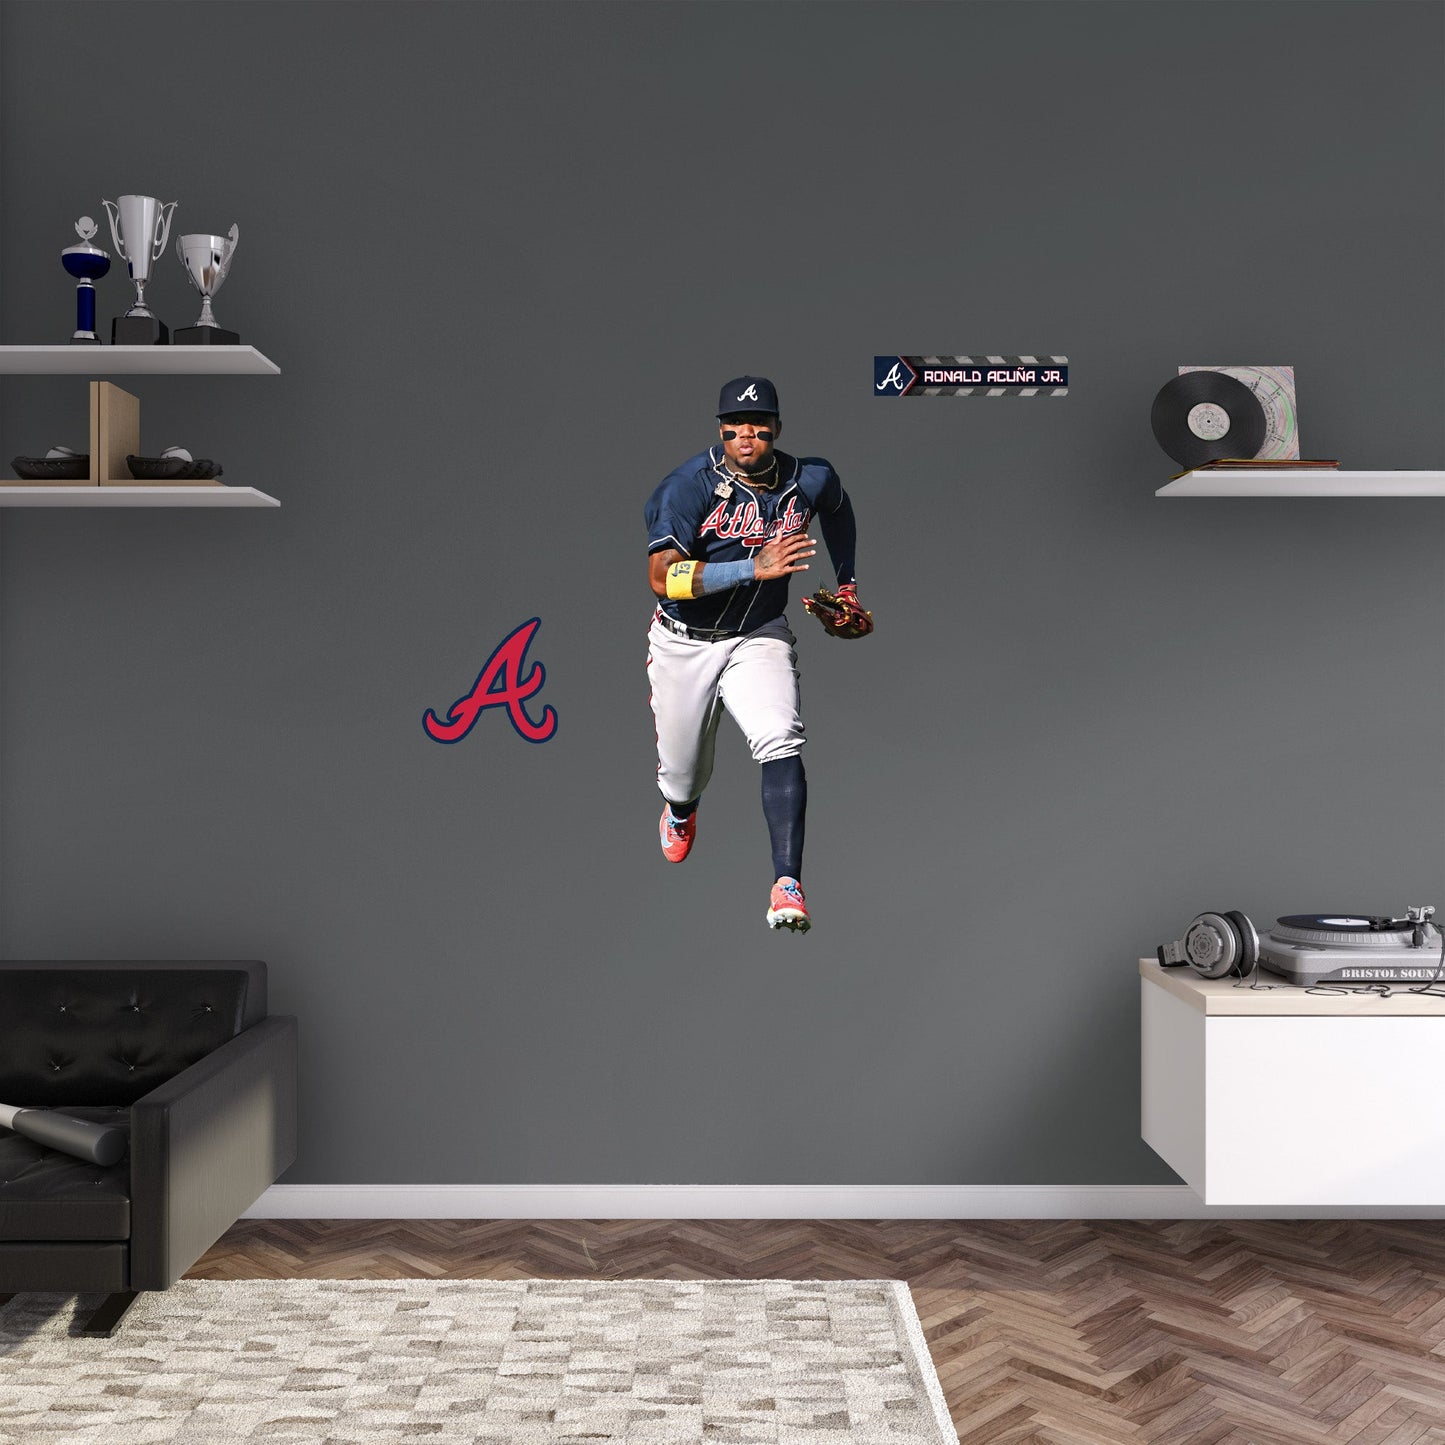 Atlanta Braves: Ronald Acuña Jr. Fielding - Officially Licensed MLB Removable Adhesive Decal